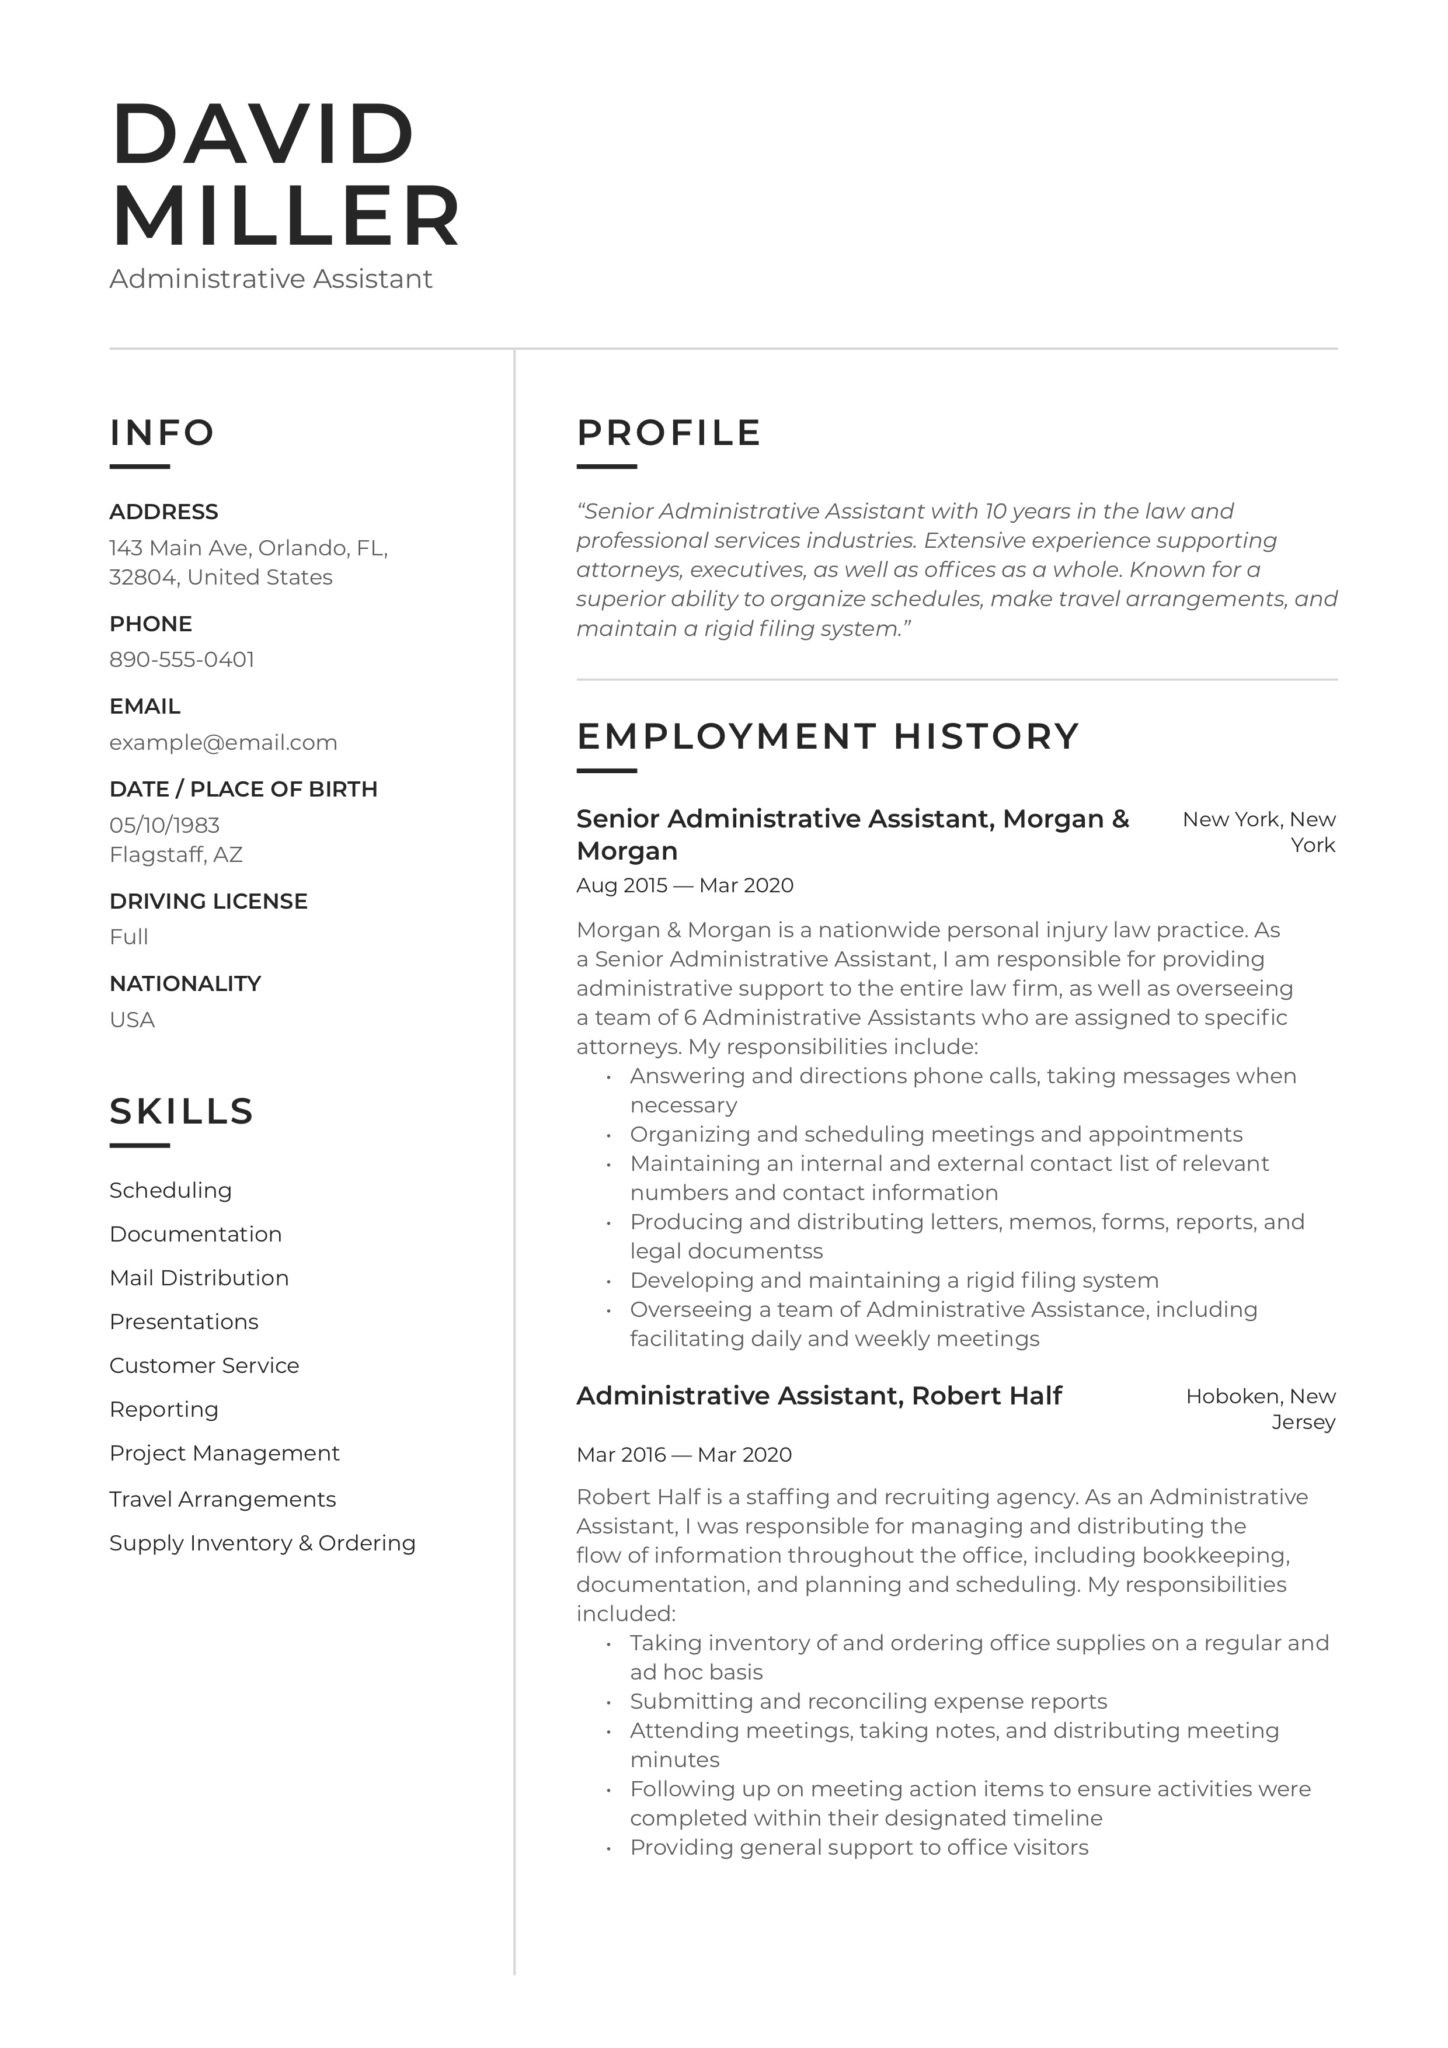 General Office Administrator Resume Free Sample 19 Administrative assistant Resumes & Guide Pdf 2022